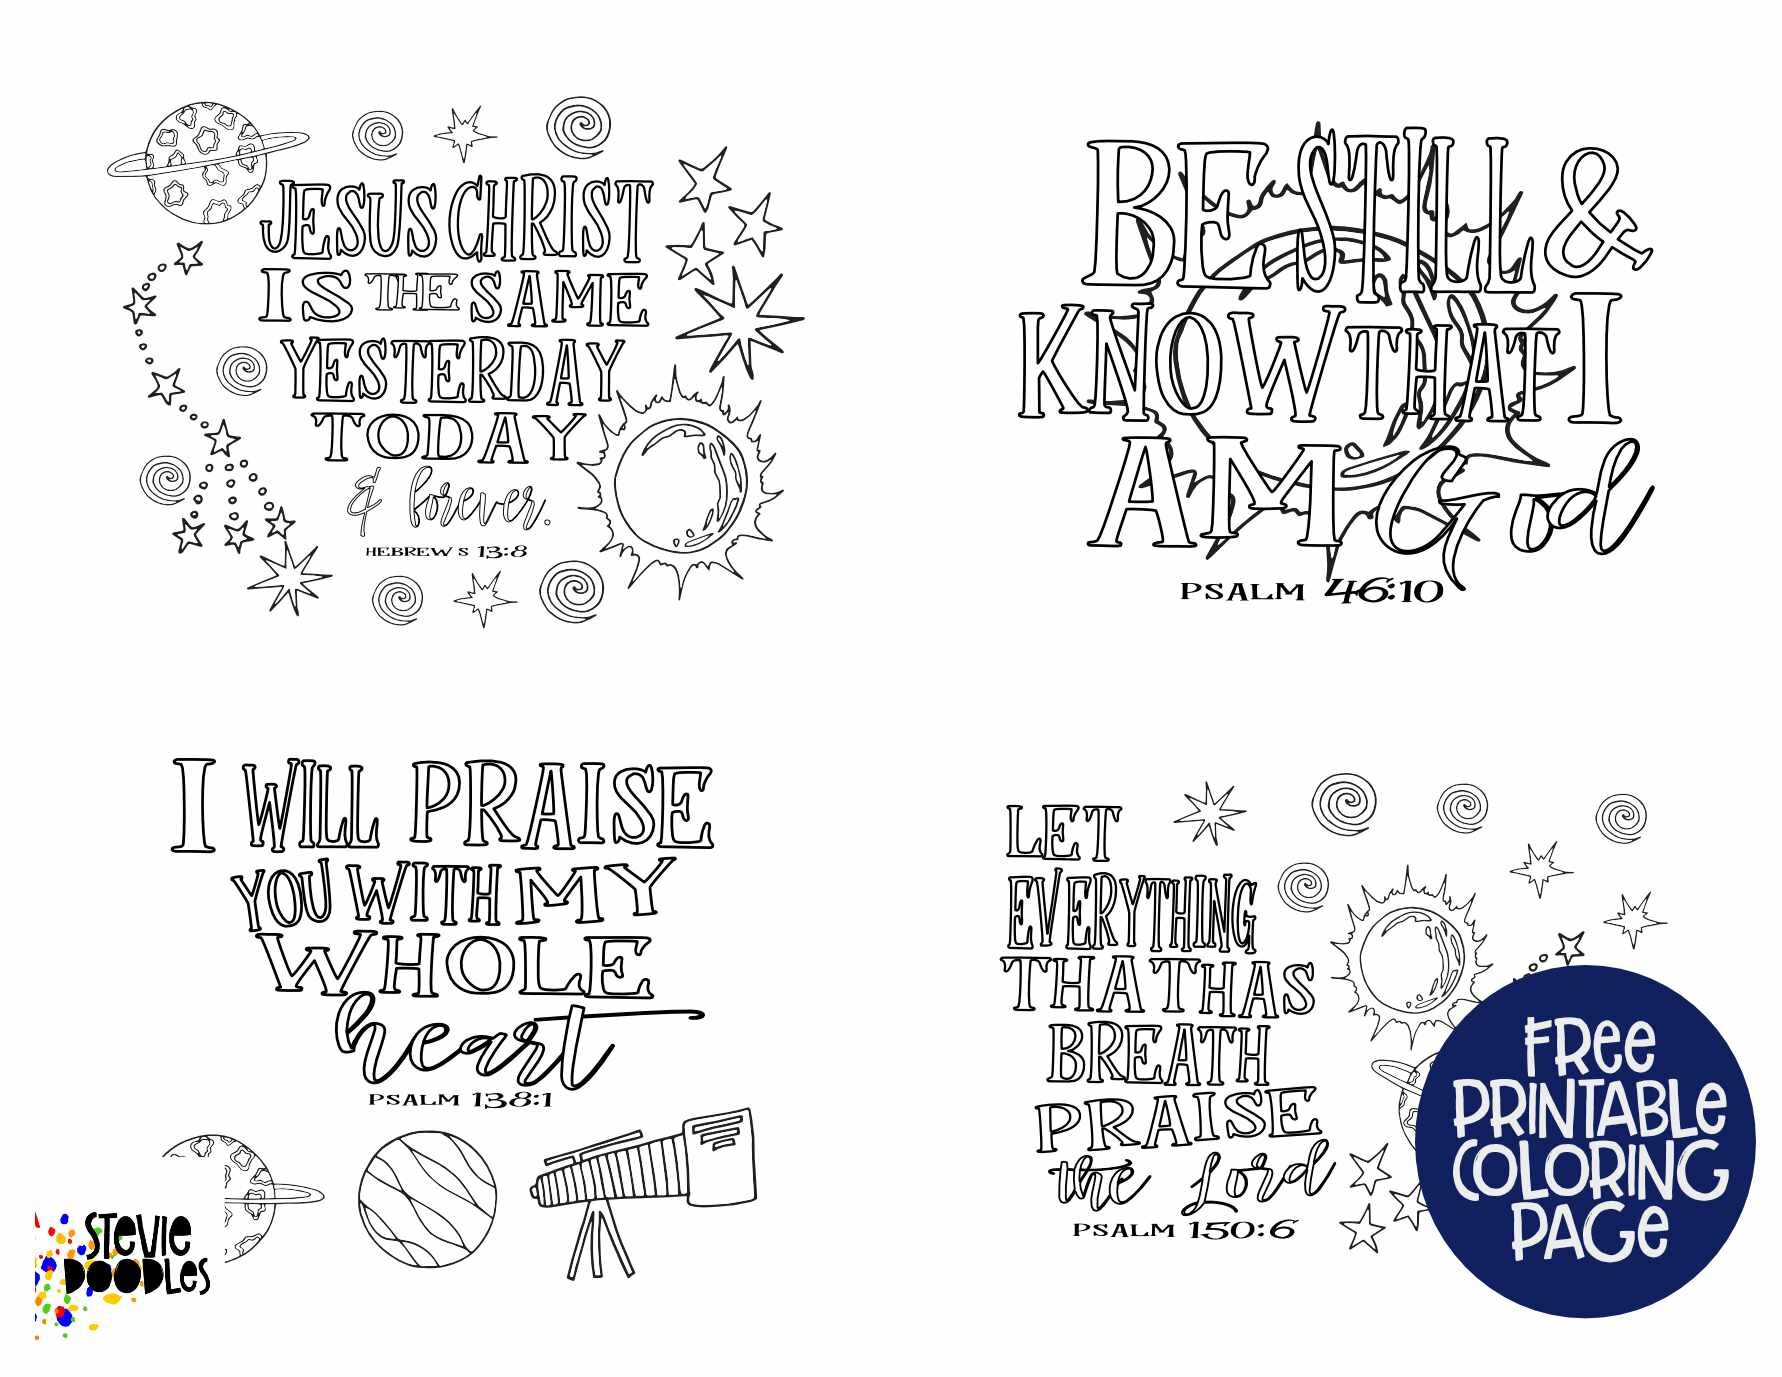 5 Free Printables! 4 Memory Verses on 1 page + each page as a separate printable coloring page